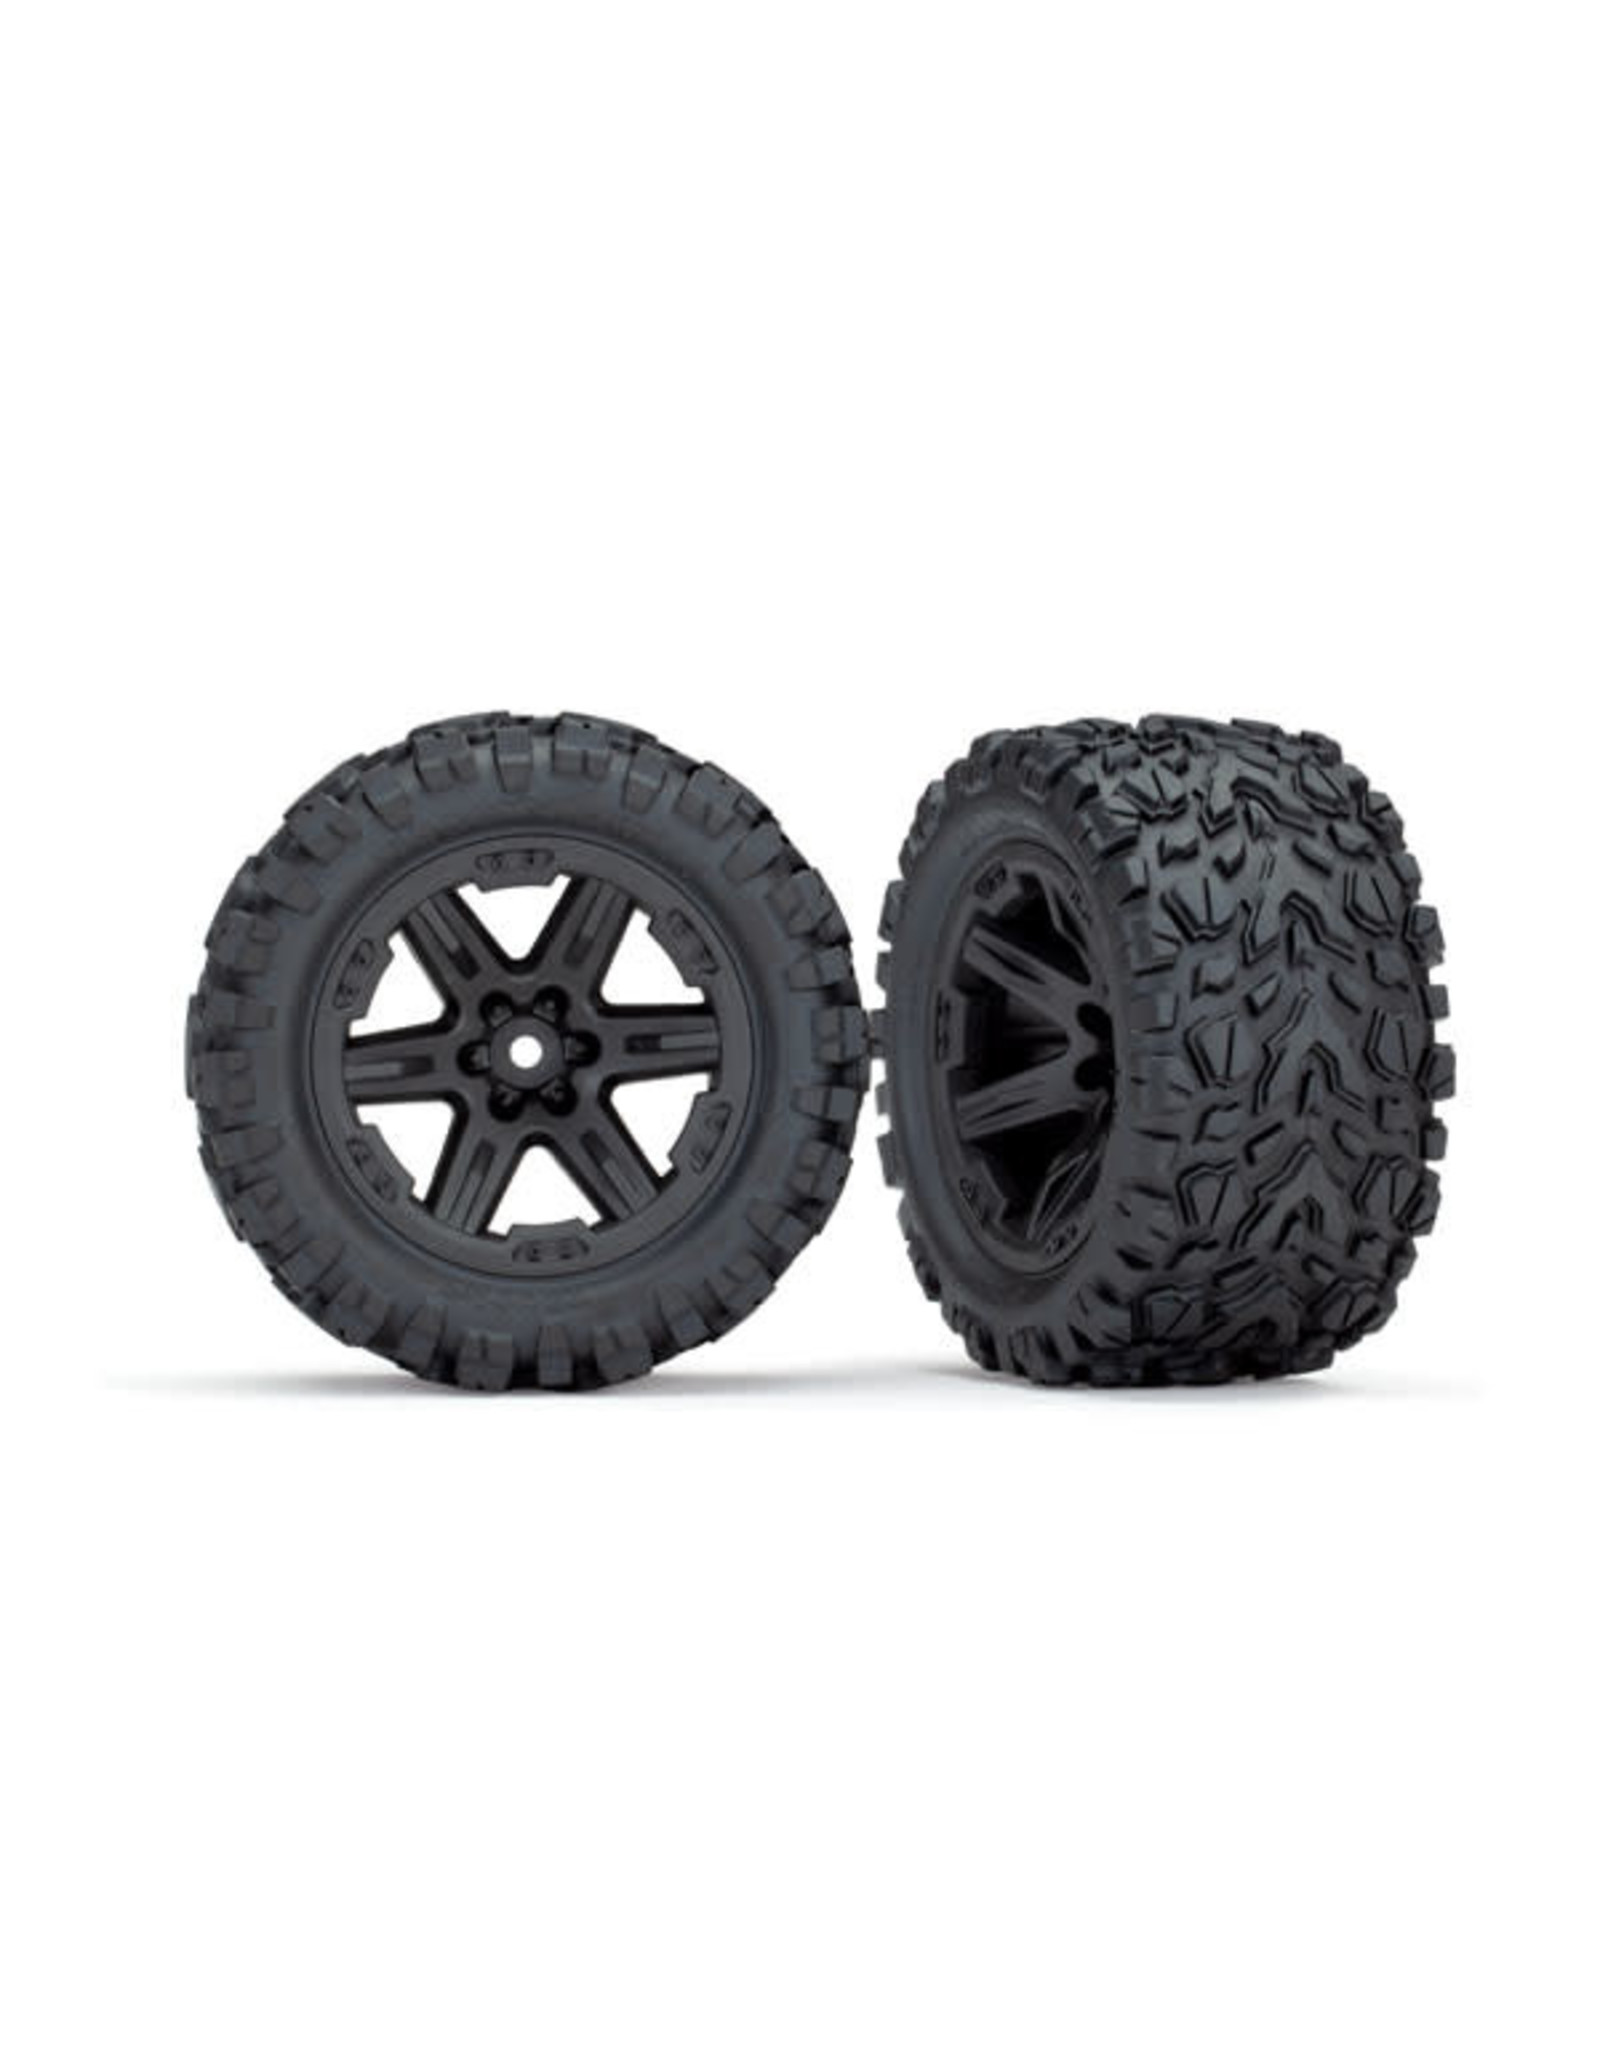 Traxxas [Tires & wheels, assembled, glued (2.8") (RXT black wheels, Talon Extreme tires, foam inserts) (4WD electric front/rear, 2WD electric front only) (2) (TSM rated)] Tires & wheels, assembled, glued (2.8") (RXT black wheels, Talon Extreme t